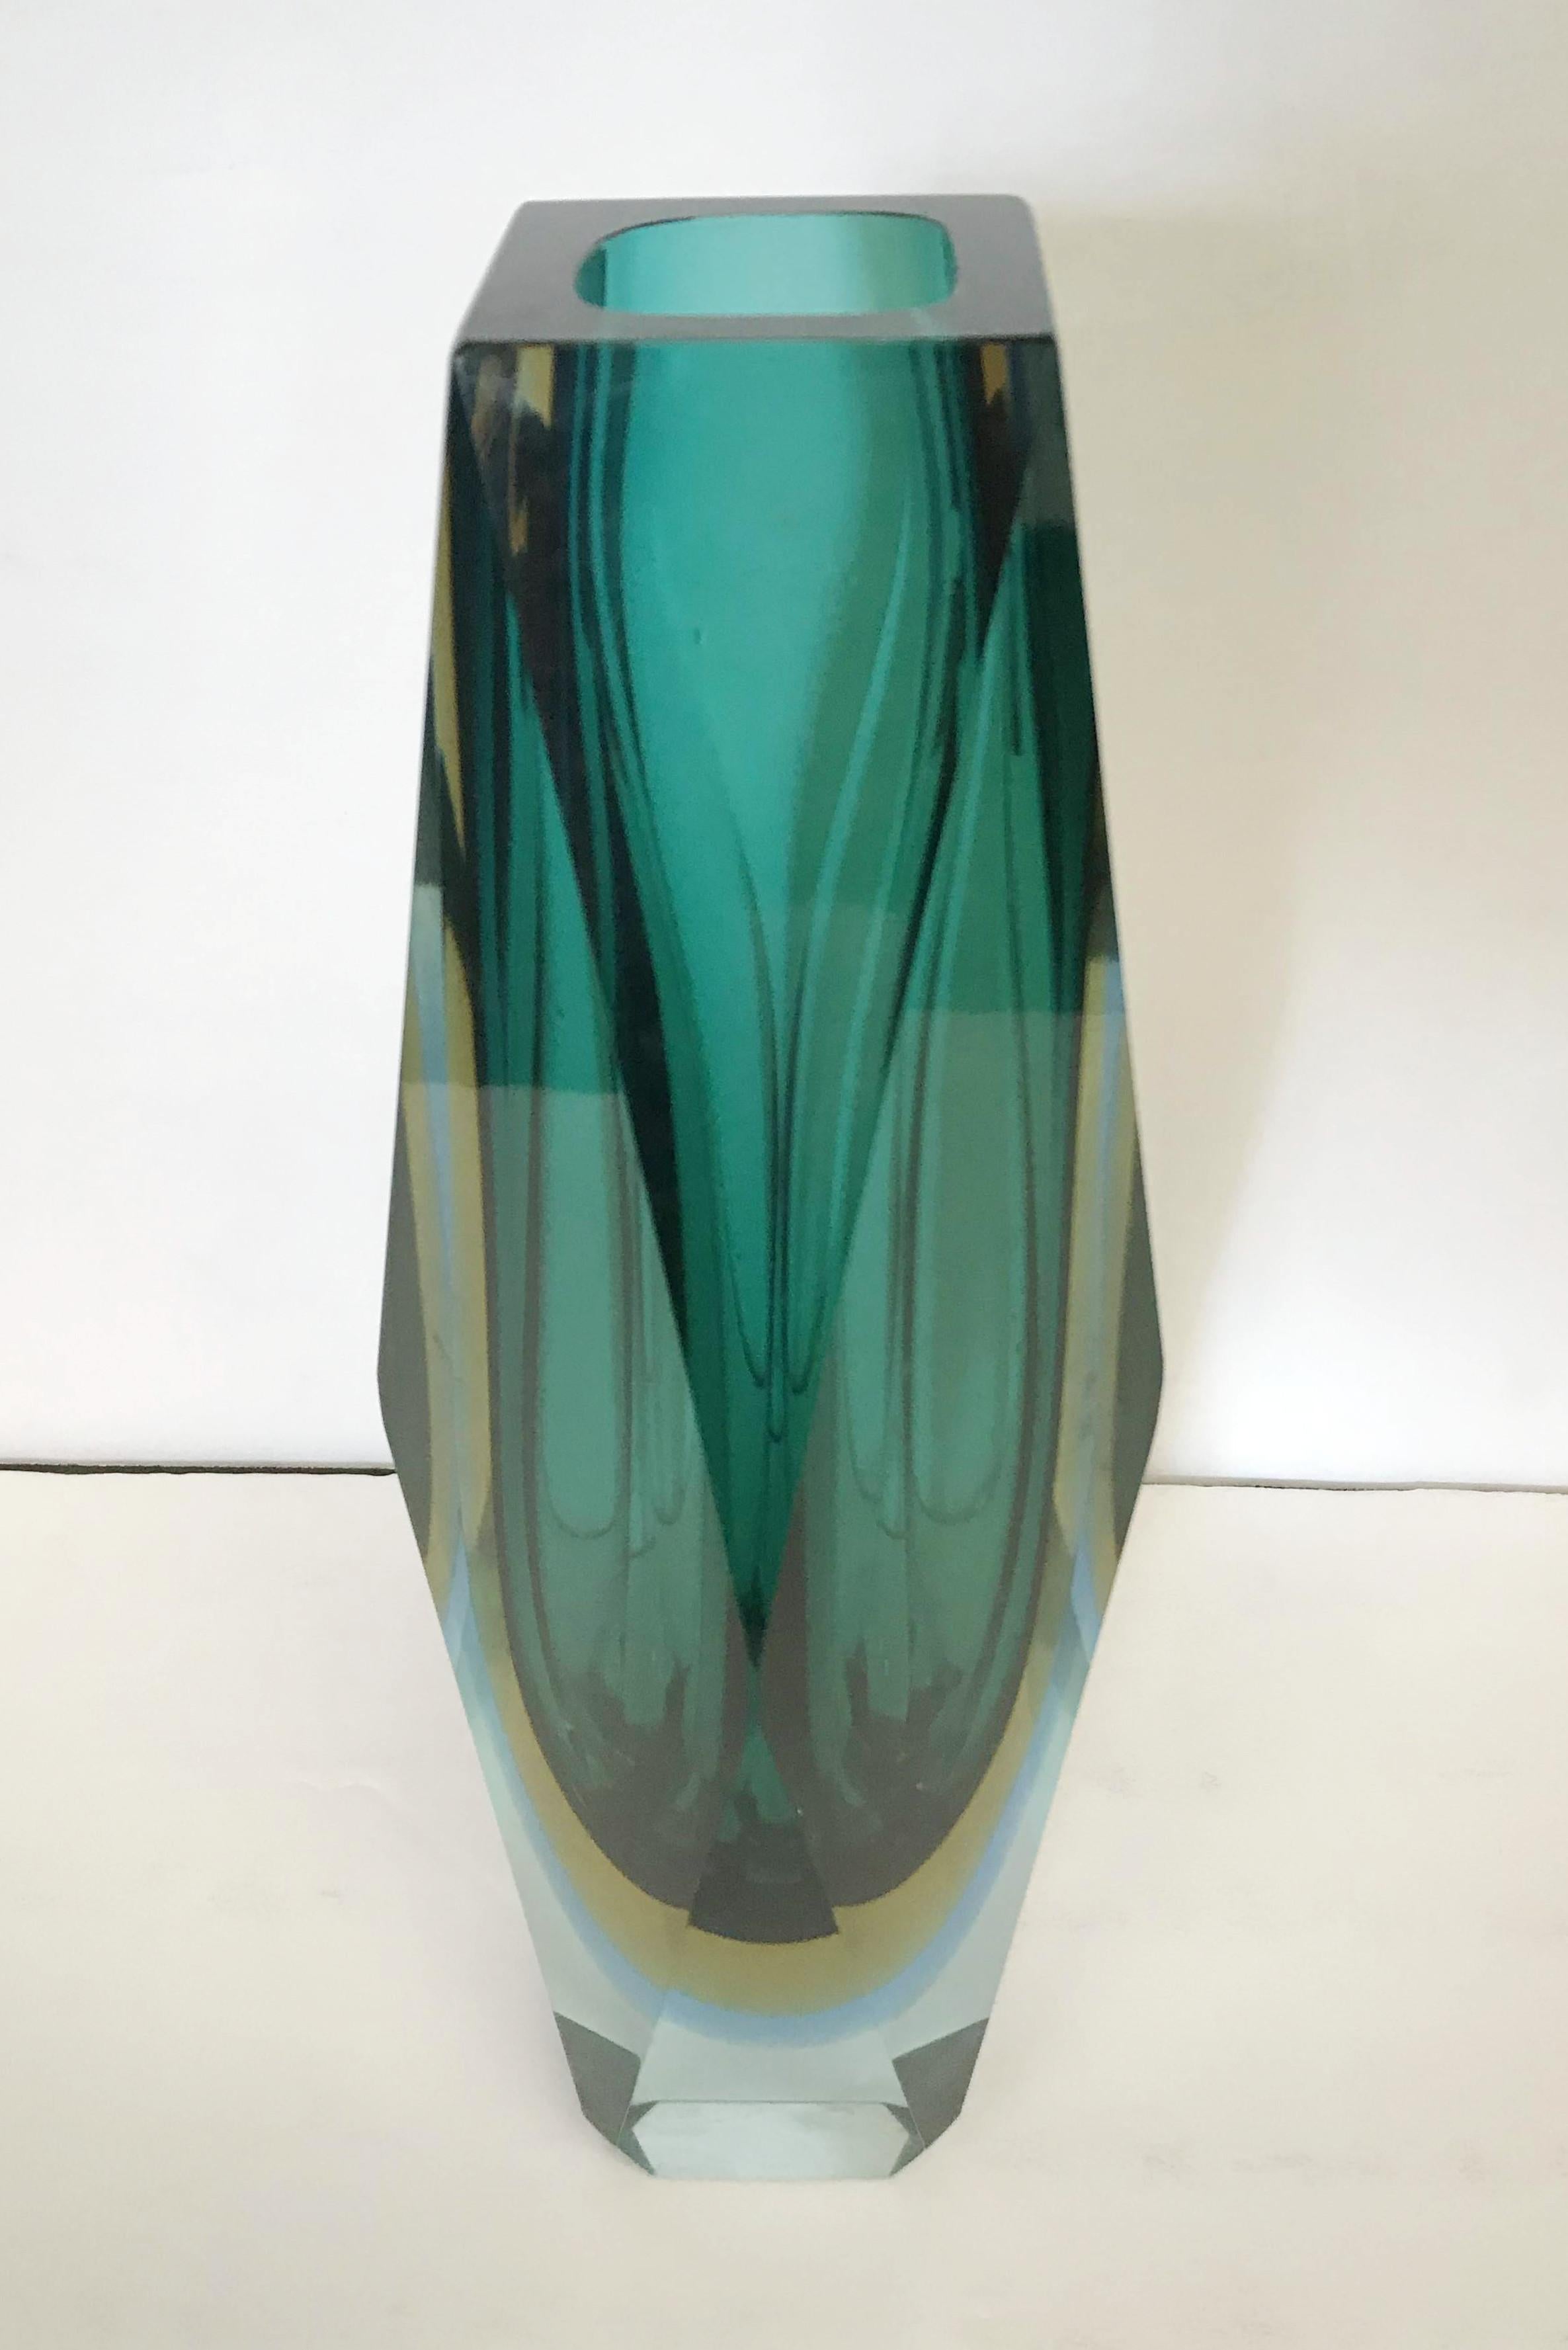 Vintage Italian faceted green Murano glass vase blown in Sommerso technique, designed by Mandruzzato, circa 1960s / Made in Italy
Measures: Height 12 inches, diameter 4.5 inches
* Please note the minor flaw in the glass from the making, shown in the